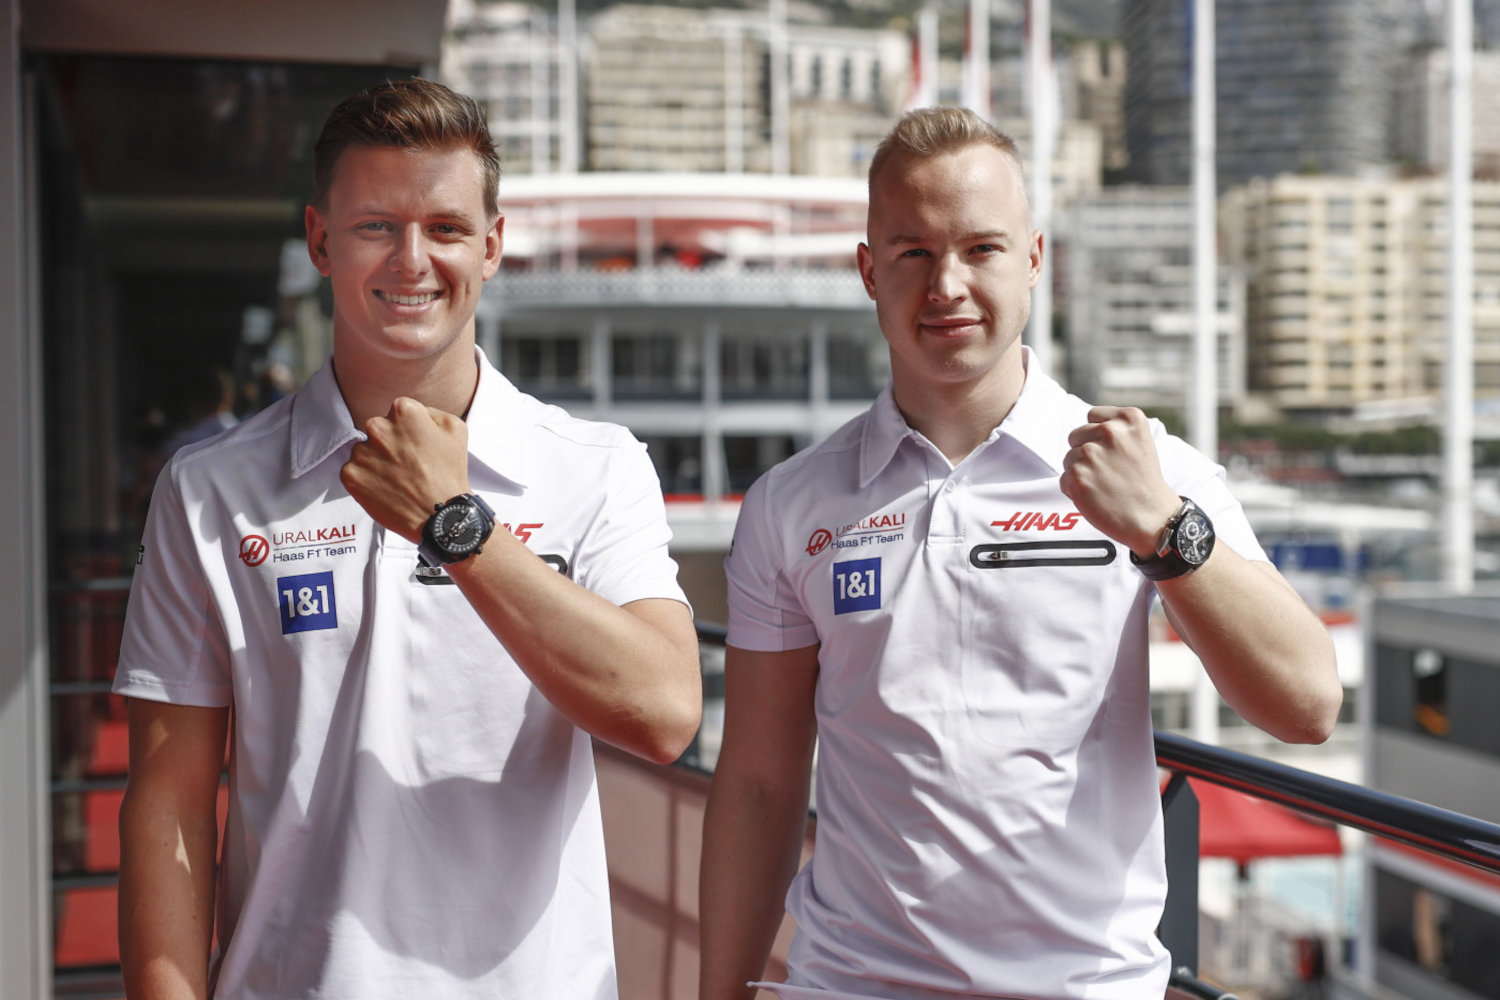 The Haas F1 x Cyrus Watches partnership as presented during the 2021 Monaco Grand Prix.